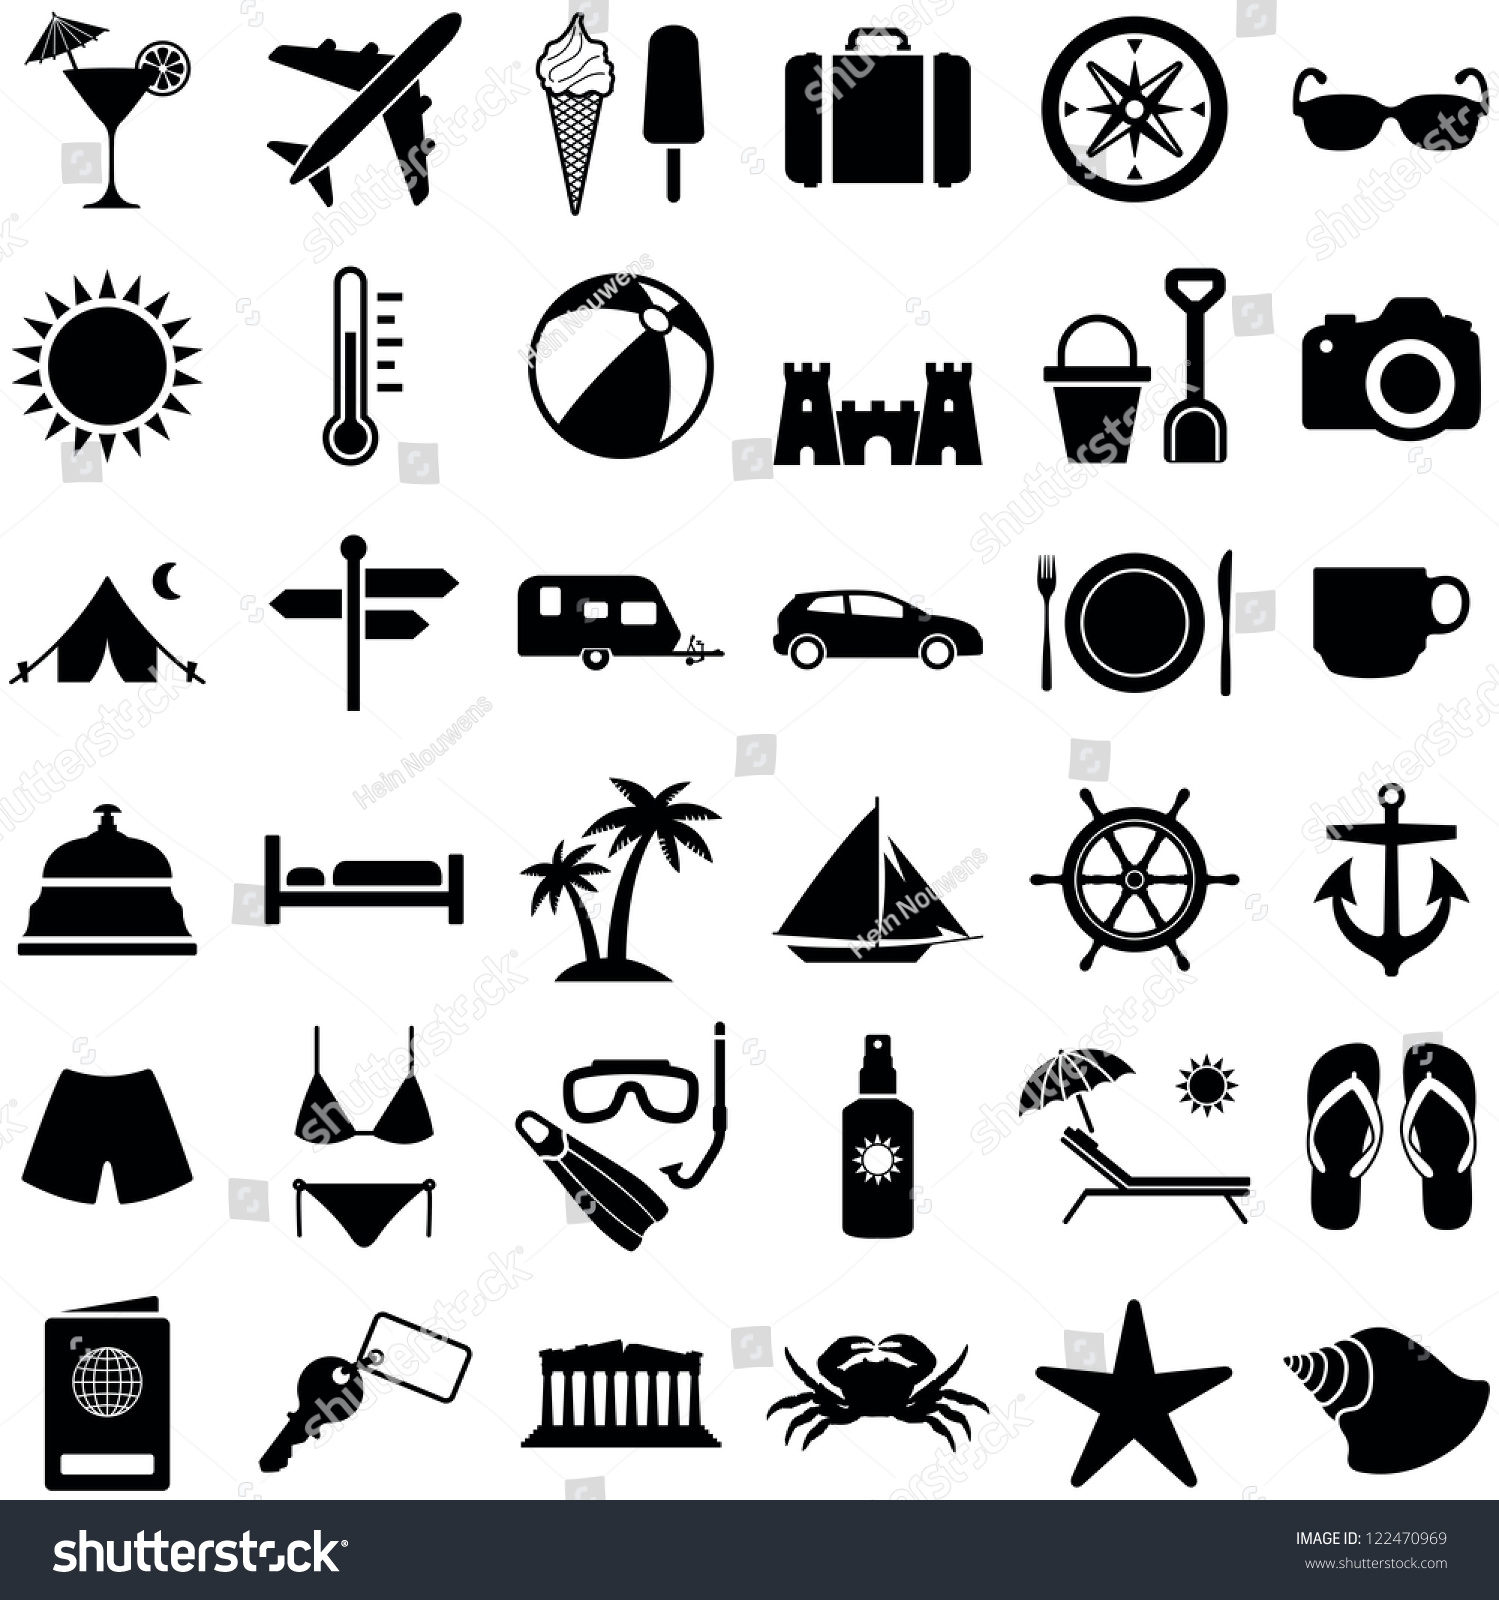 free travel clipart black and white - photo #29